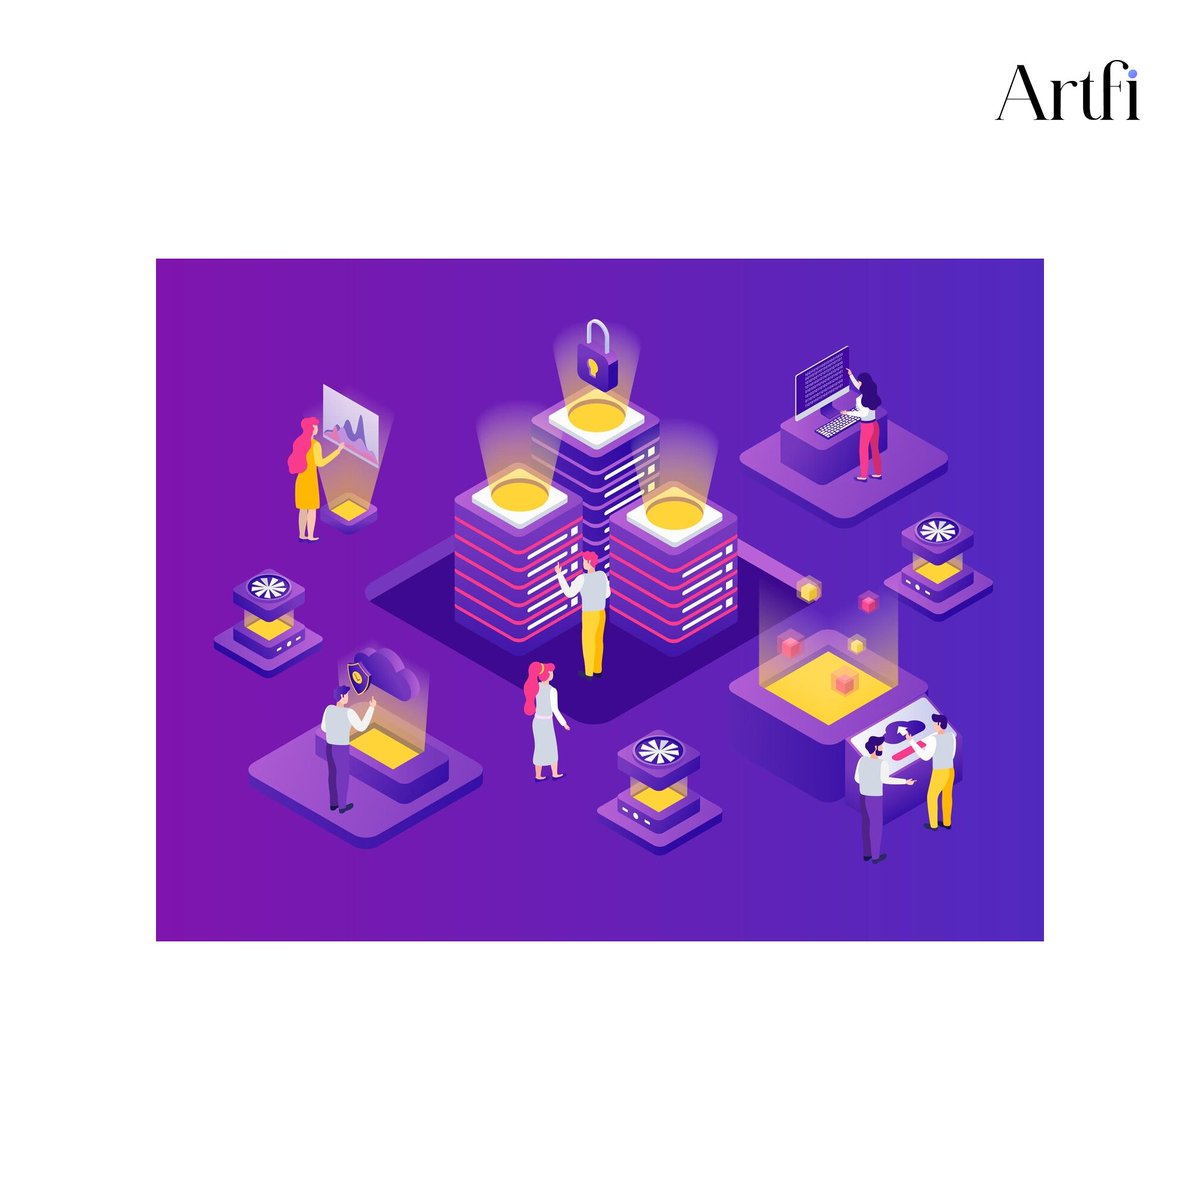 With Artfi's fractional ownership model and blockchain-based platform, investing in art has never been easier or more accessible. Join us in exploring the world of art investment today.  #artfi #investment #fineart #artmarket #diversify